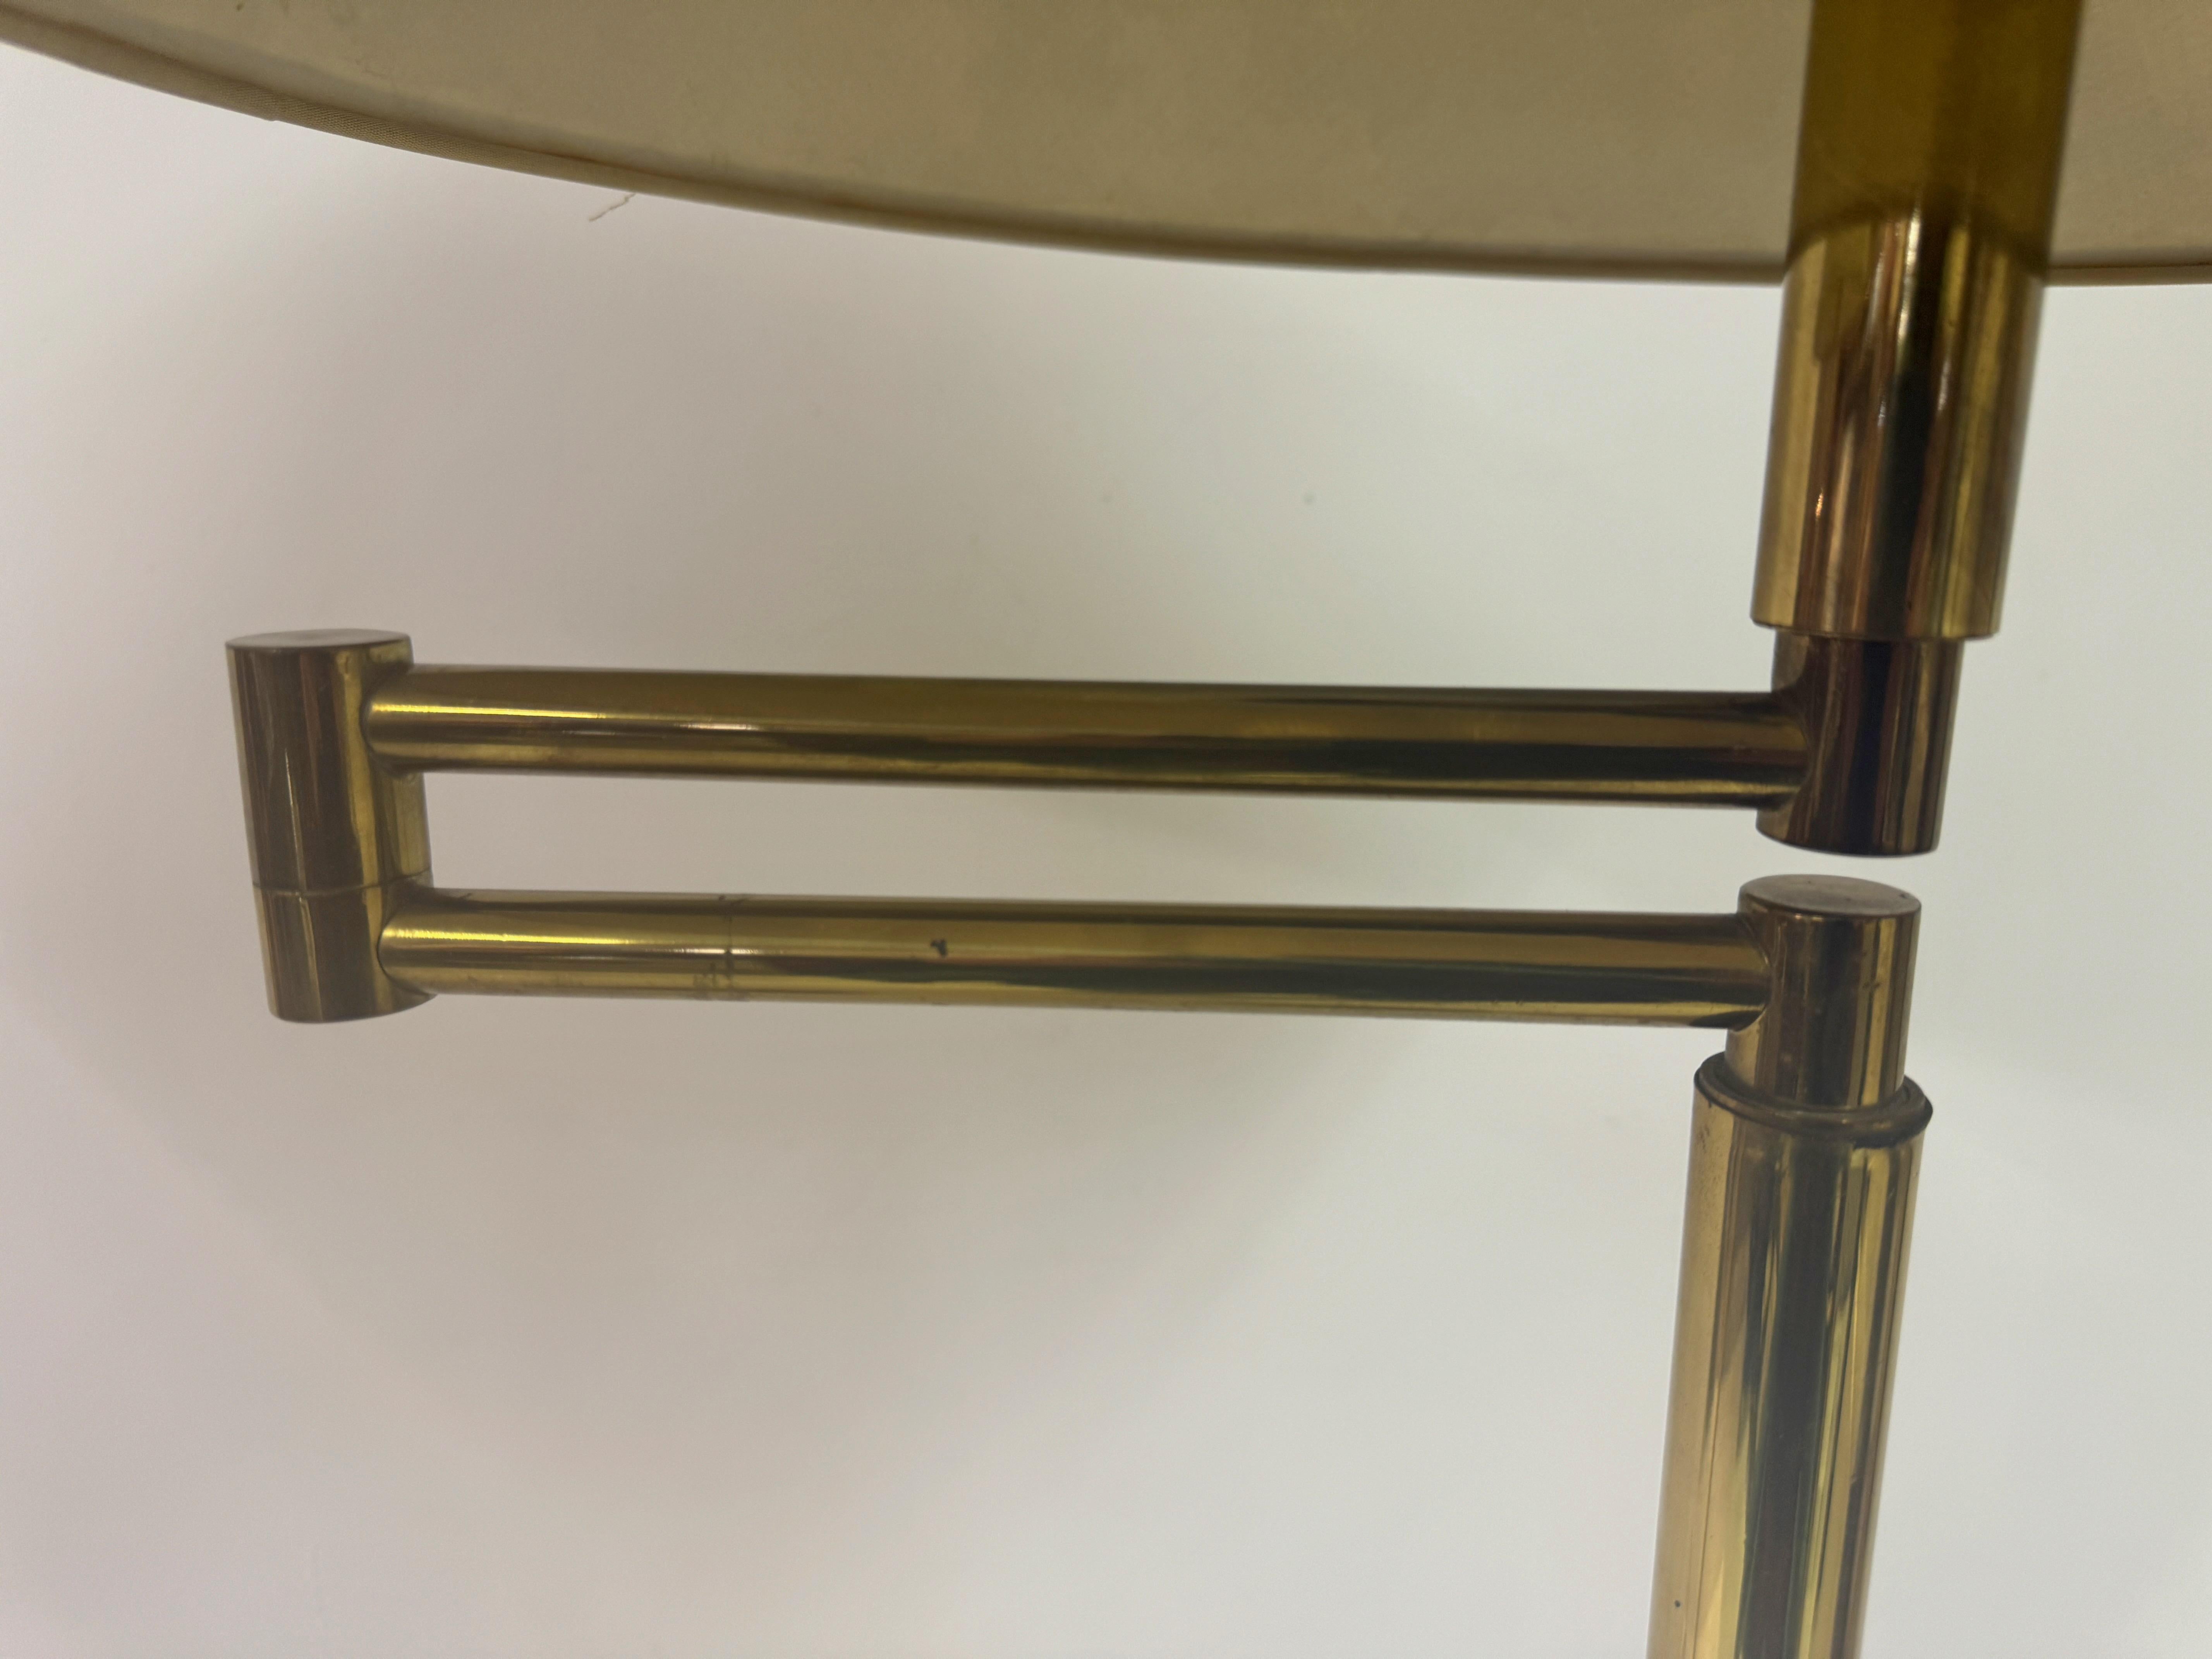 Pair of 1970s Italian Brass Swing Arm Floor Lamps In Good Condition For Sale In London, London